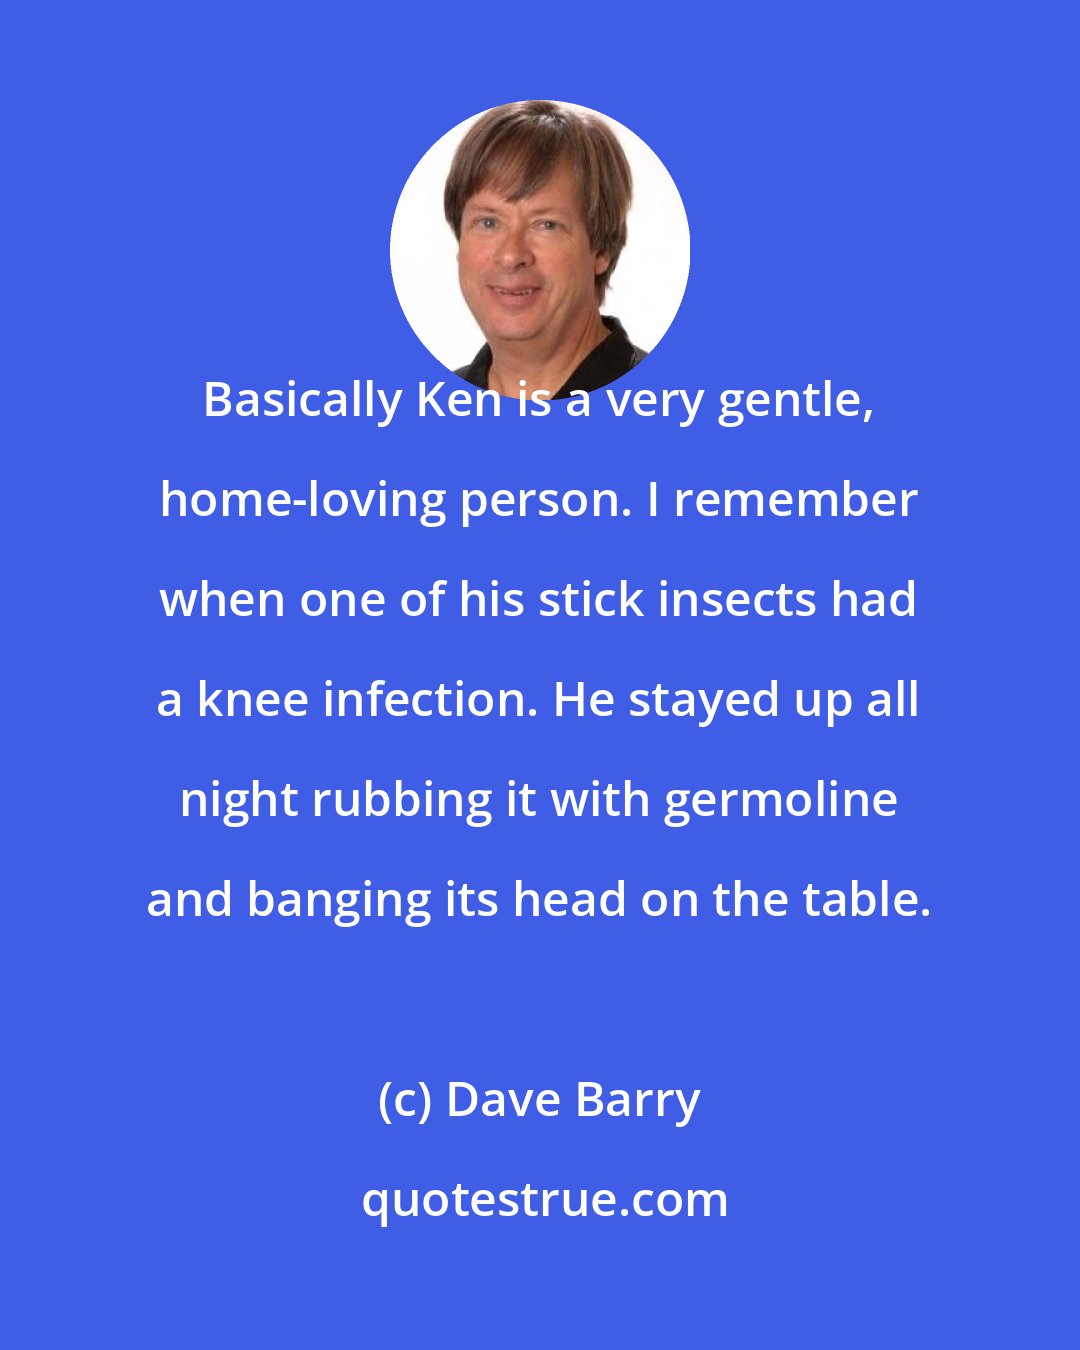 Dave Barry: Basically Ken is a very gentle, home-loving person. I remember when one of his stick insects had a knee infection. He stayed up all night rubbing it with germoline and banging its head on the table.